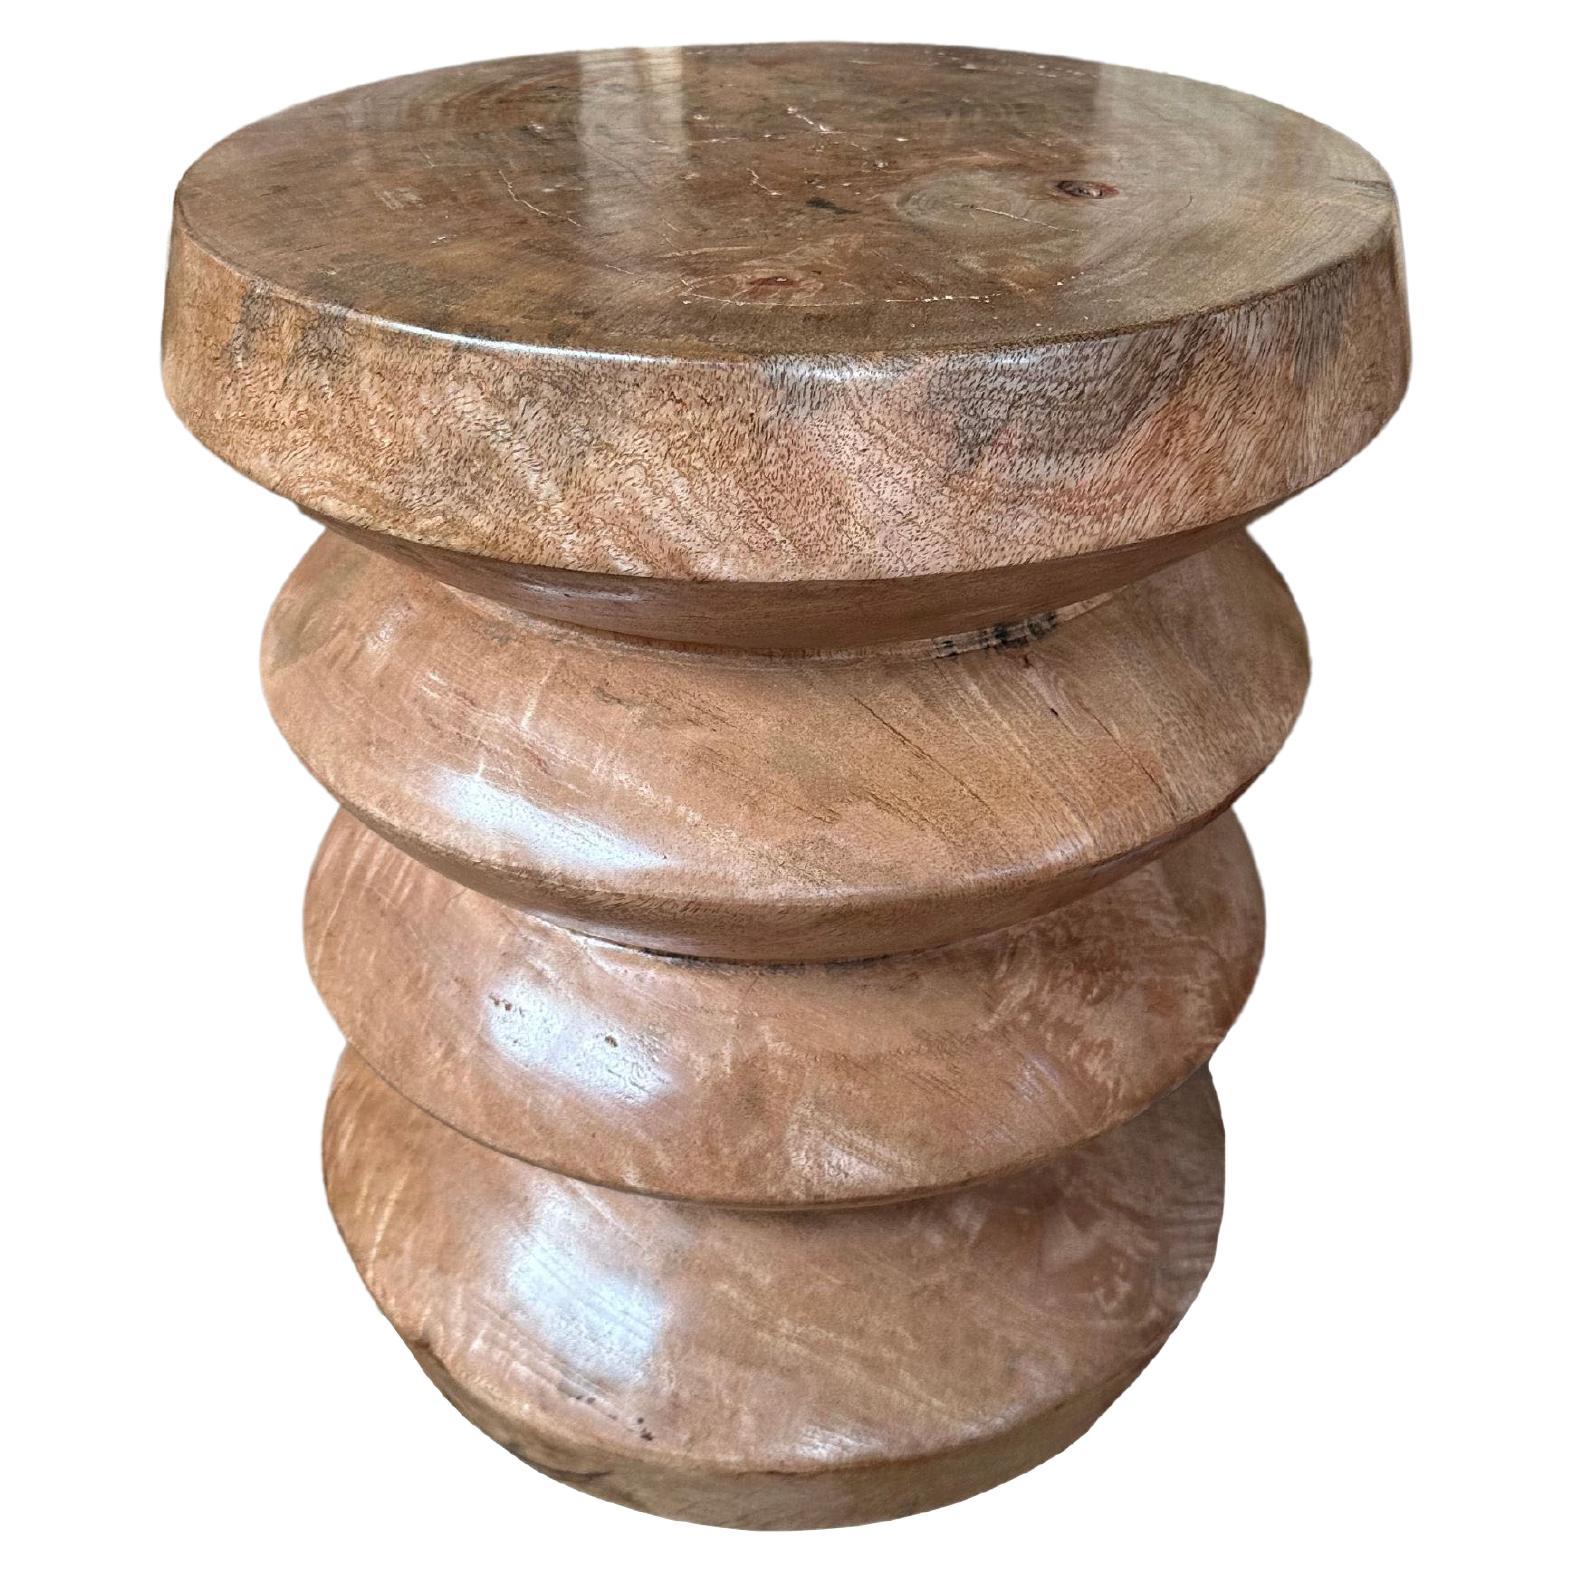 Sculptural Mango Wood Side Table, Stacked Design Hand-Crafted Modern Organic For Sale